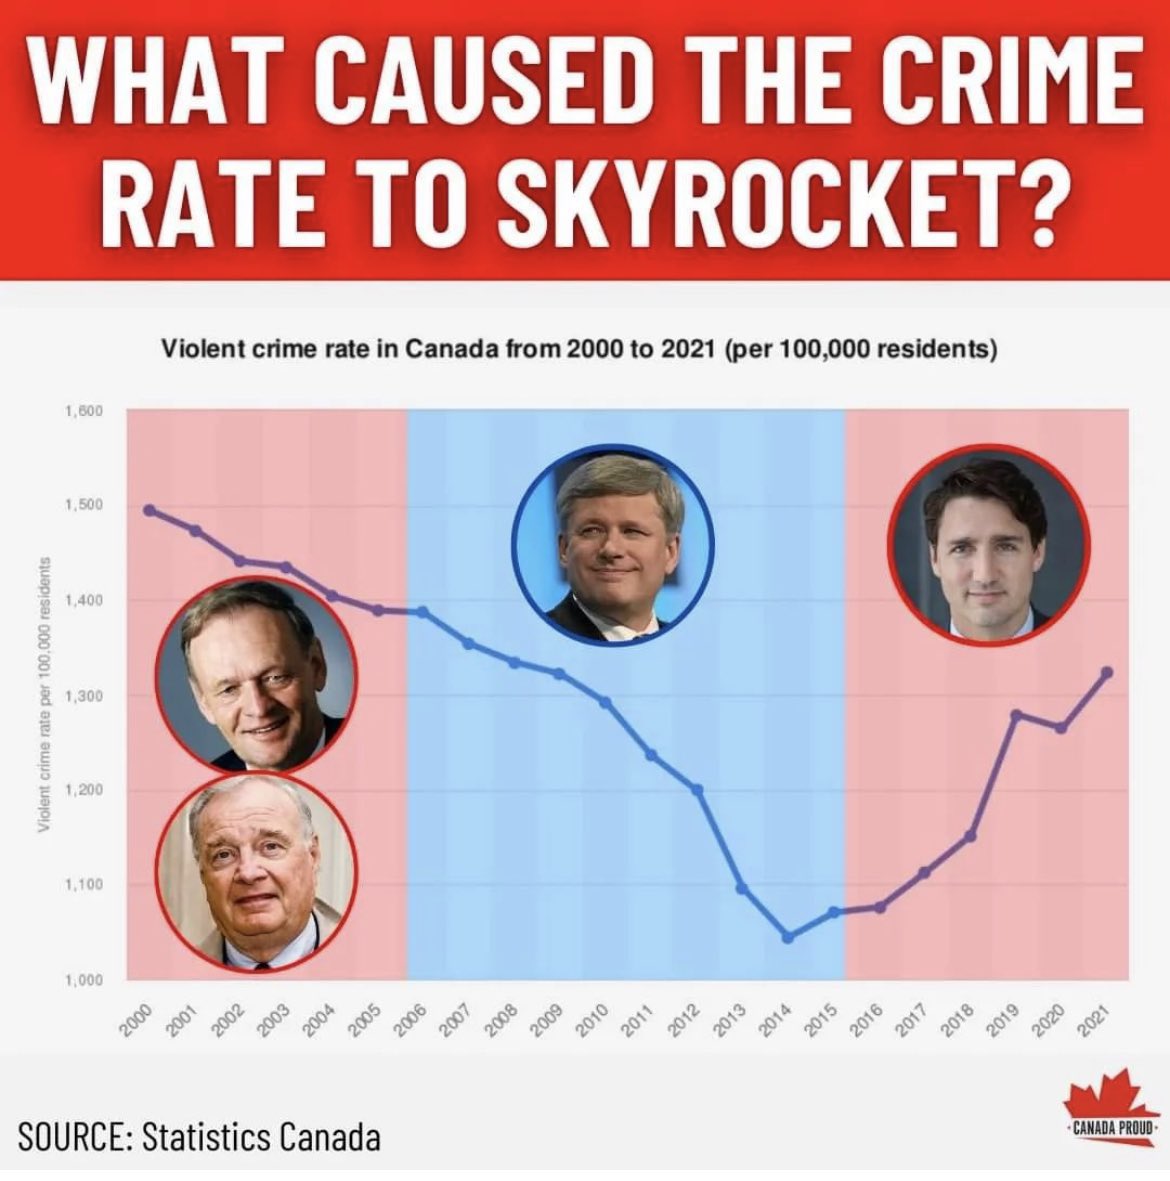 @themadsloth @JustinTrudeau and the @liberal_party don’t take crime serious. #TrudeauBrokeCanada